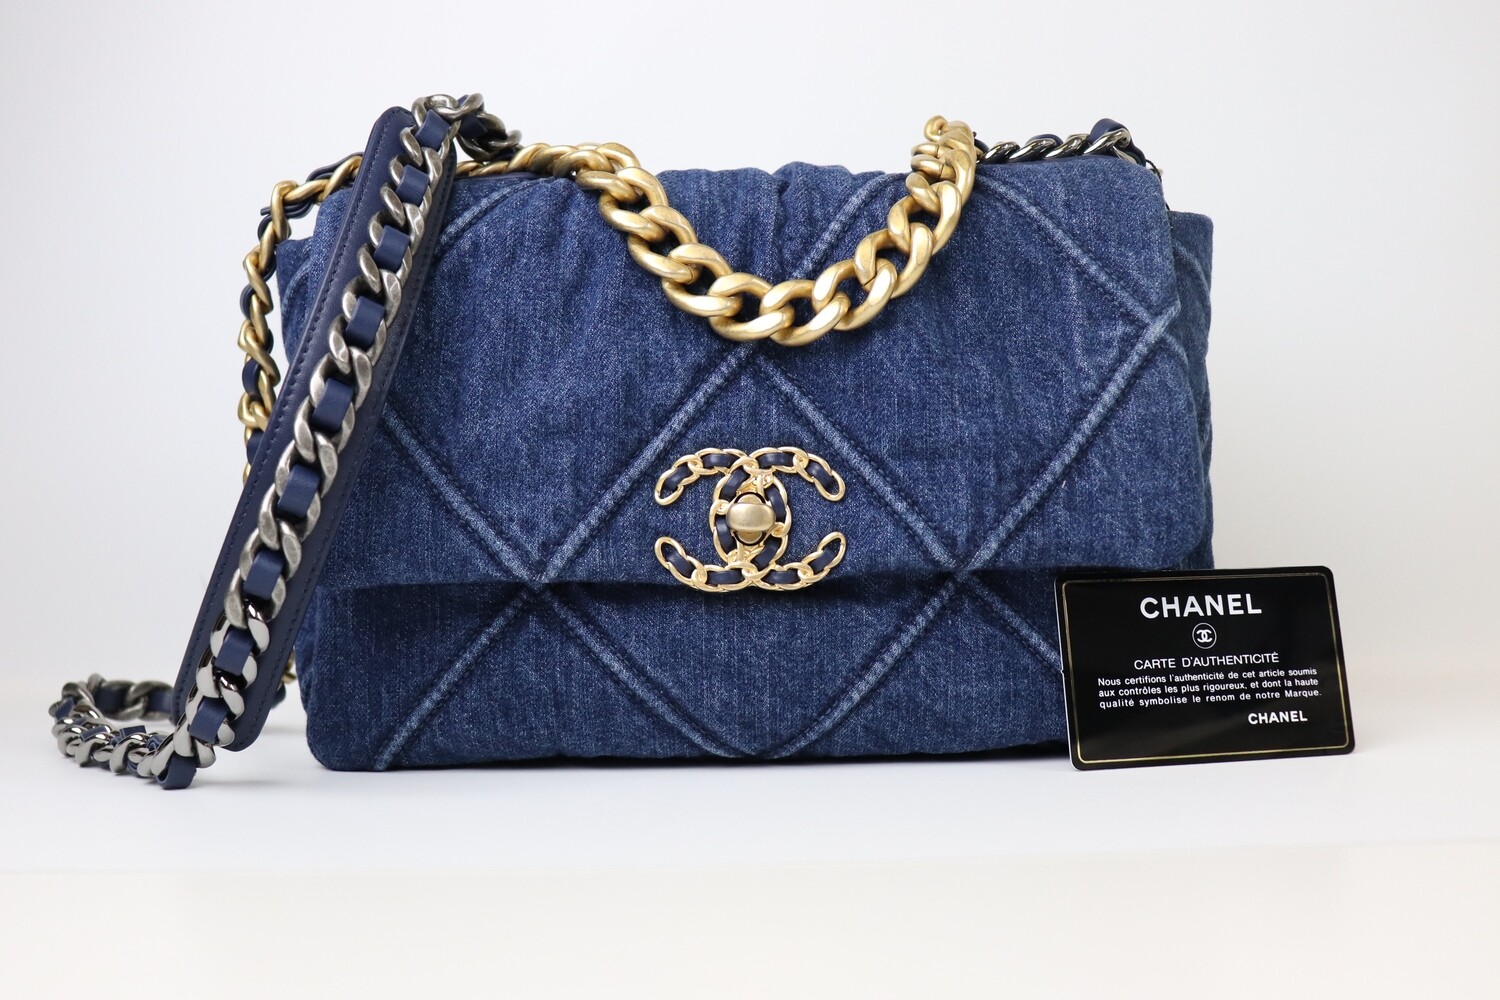 Chanel 19 Small Denim, New in Dustbag